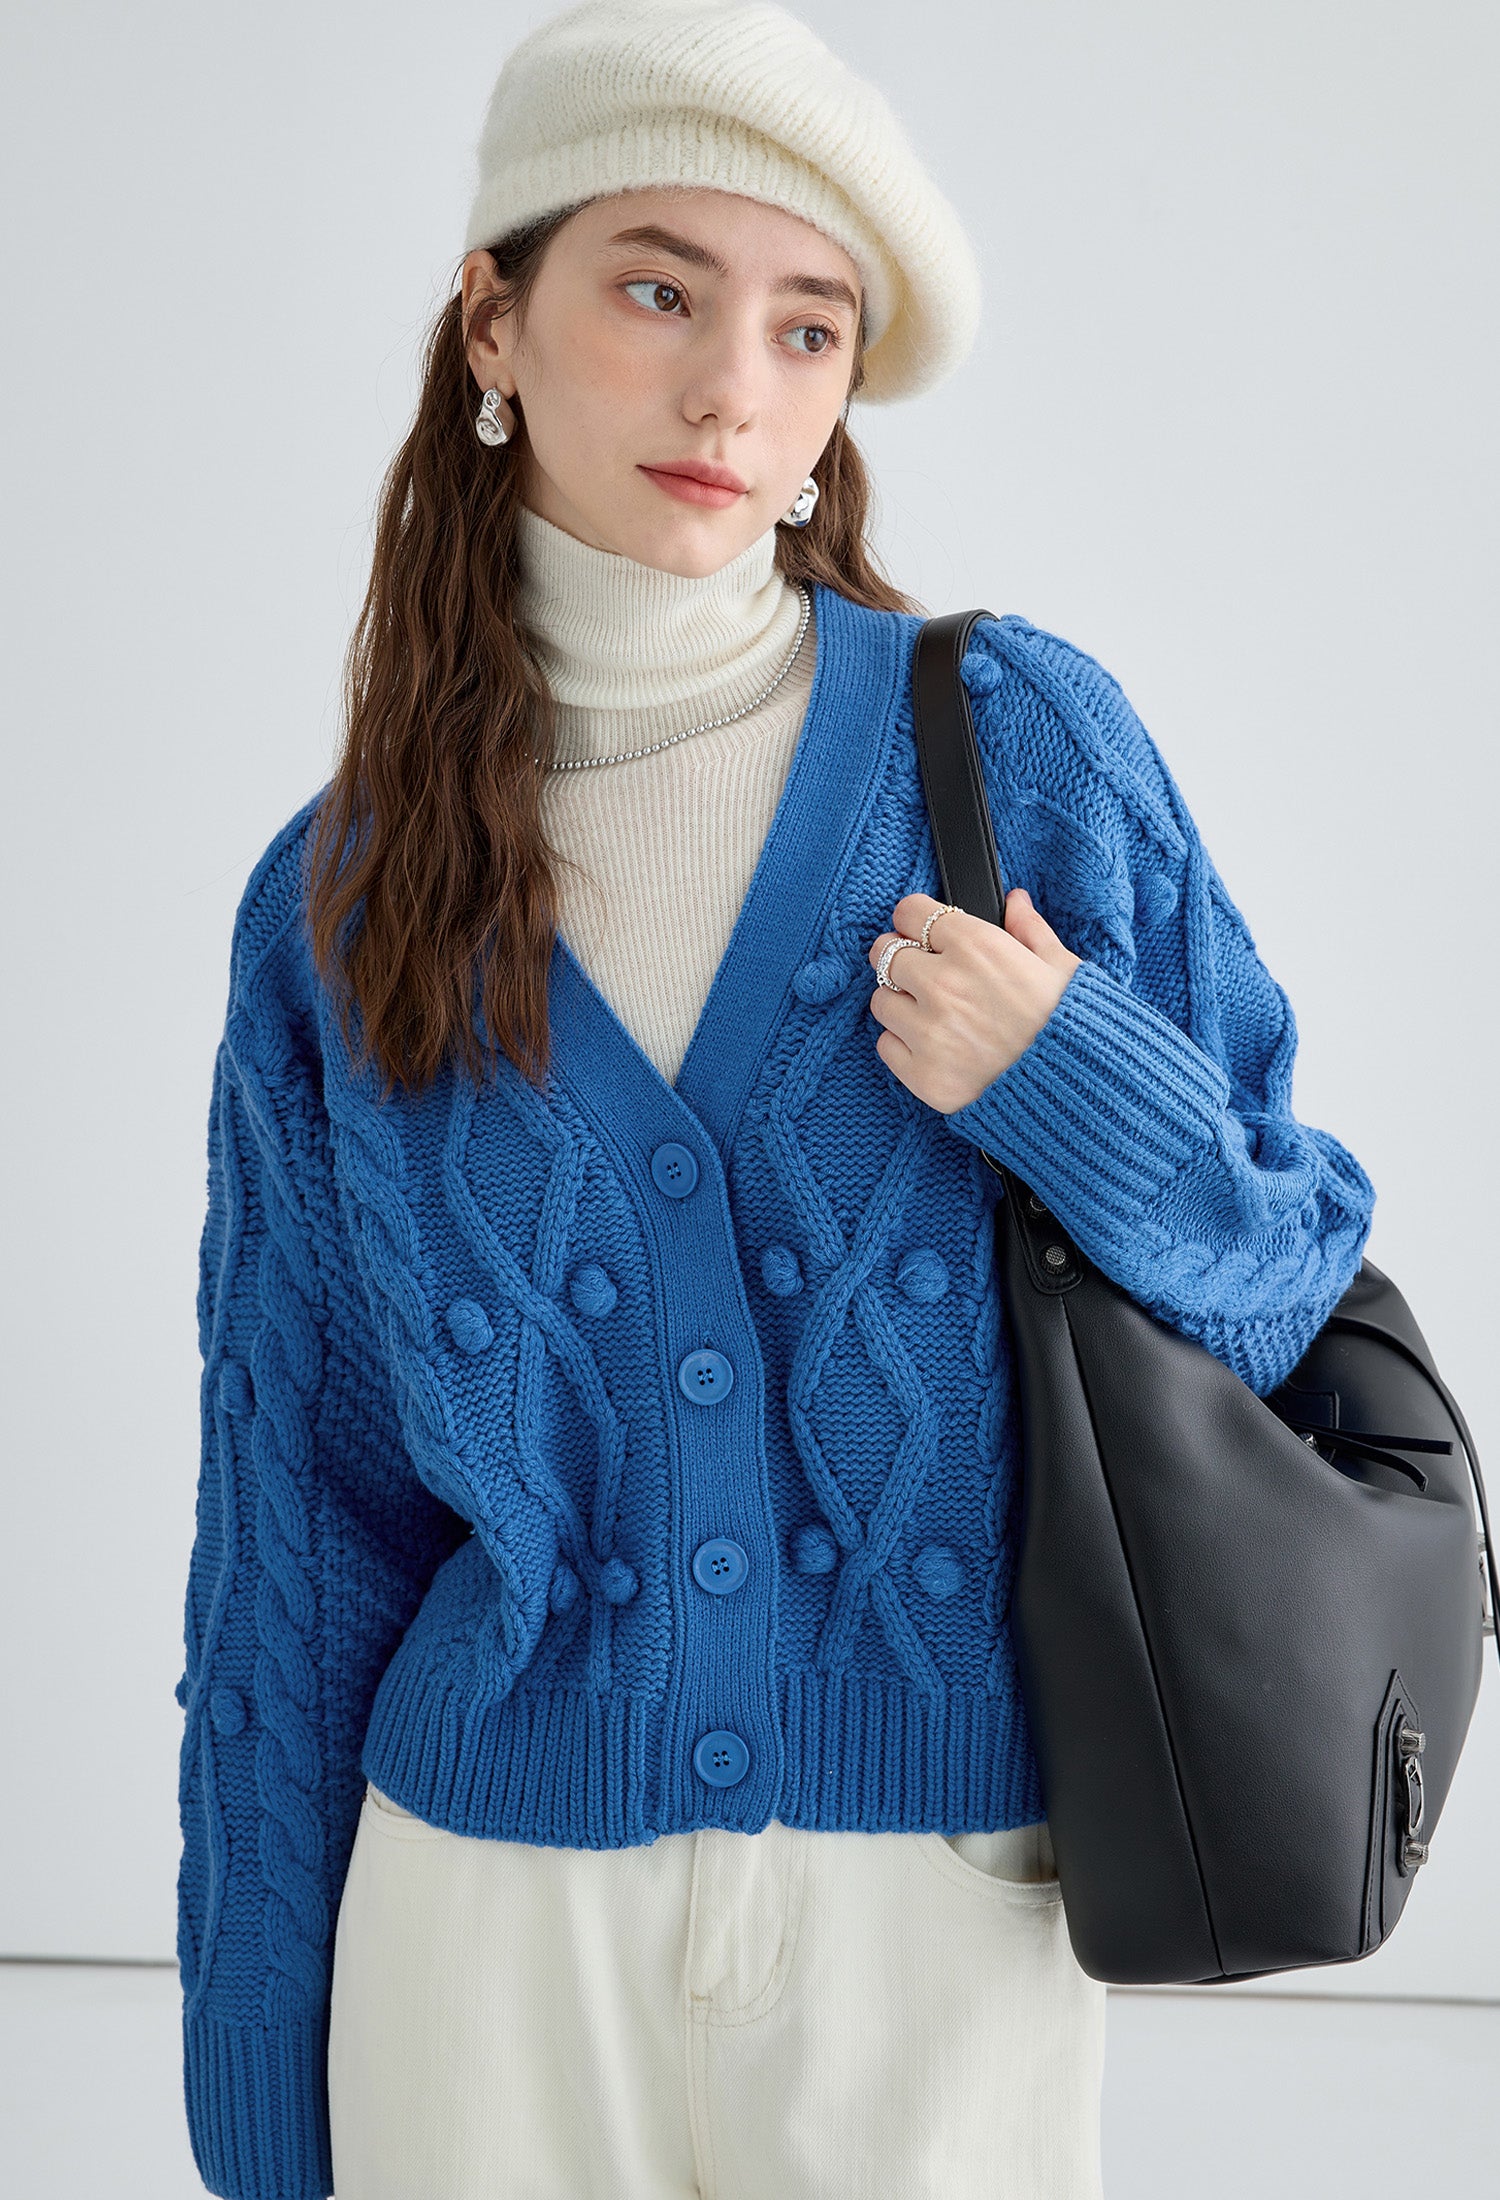 vneck,cable,knit,cardigan,blue,simple,cute,cool,sexy,mode